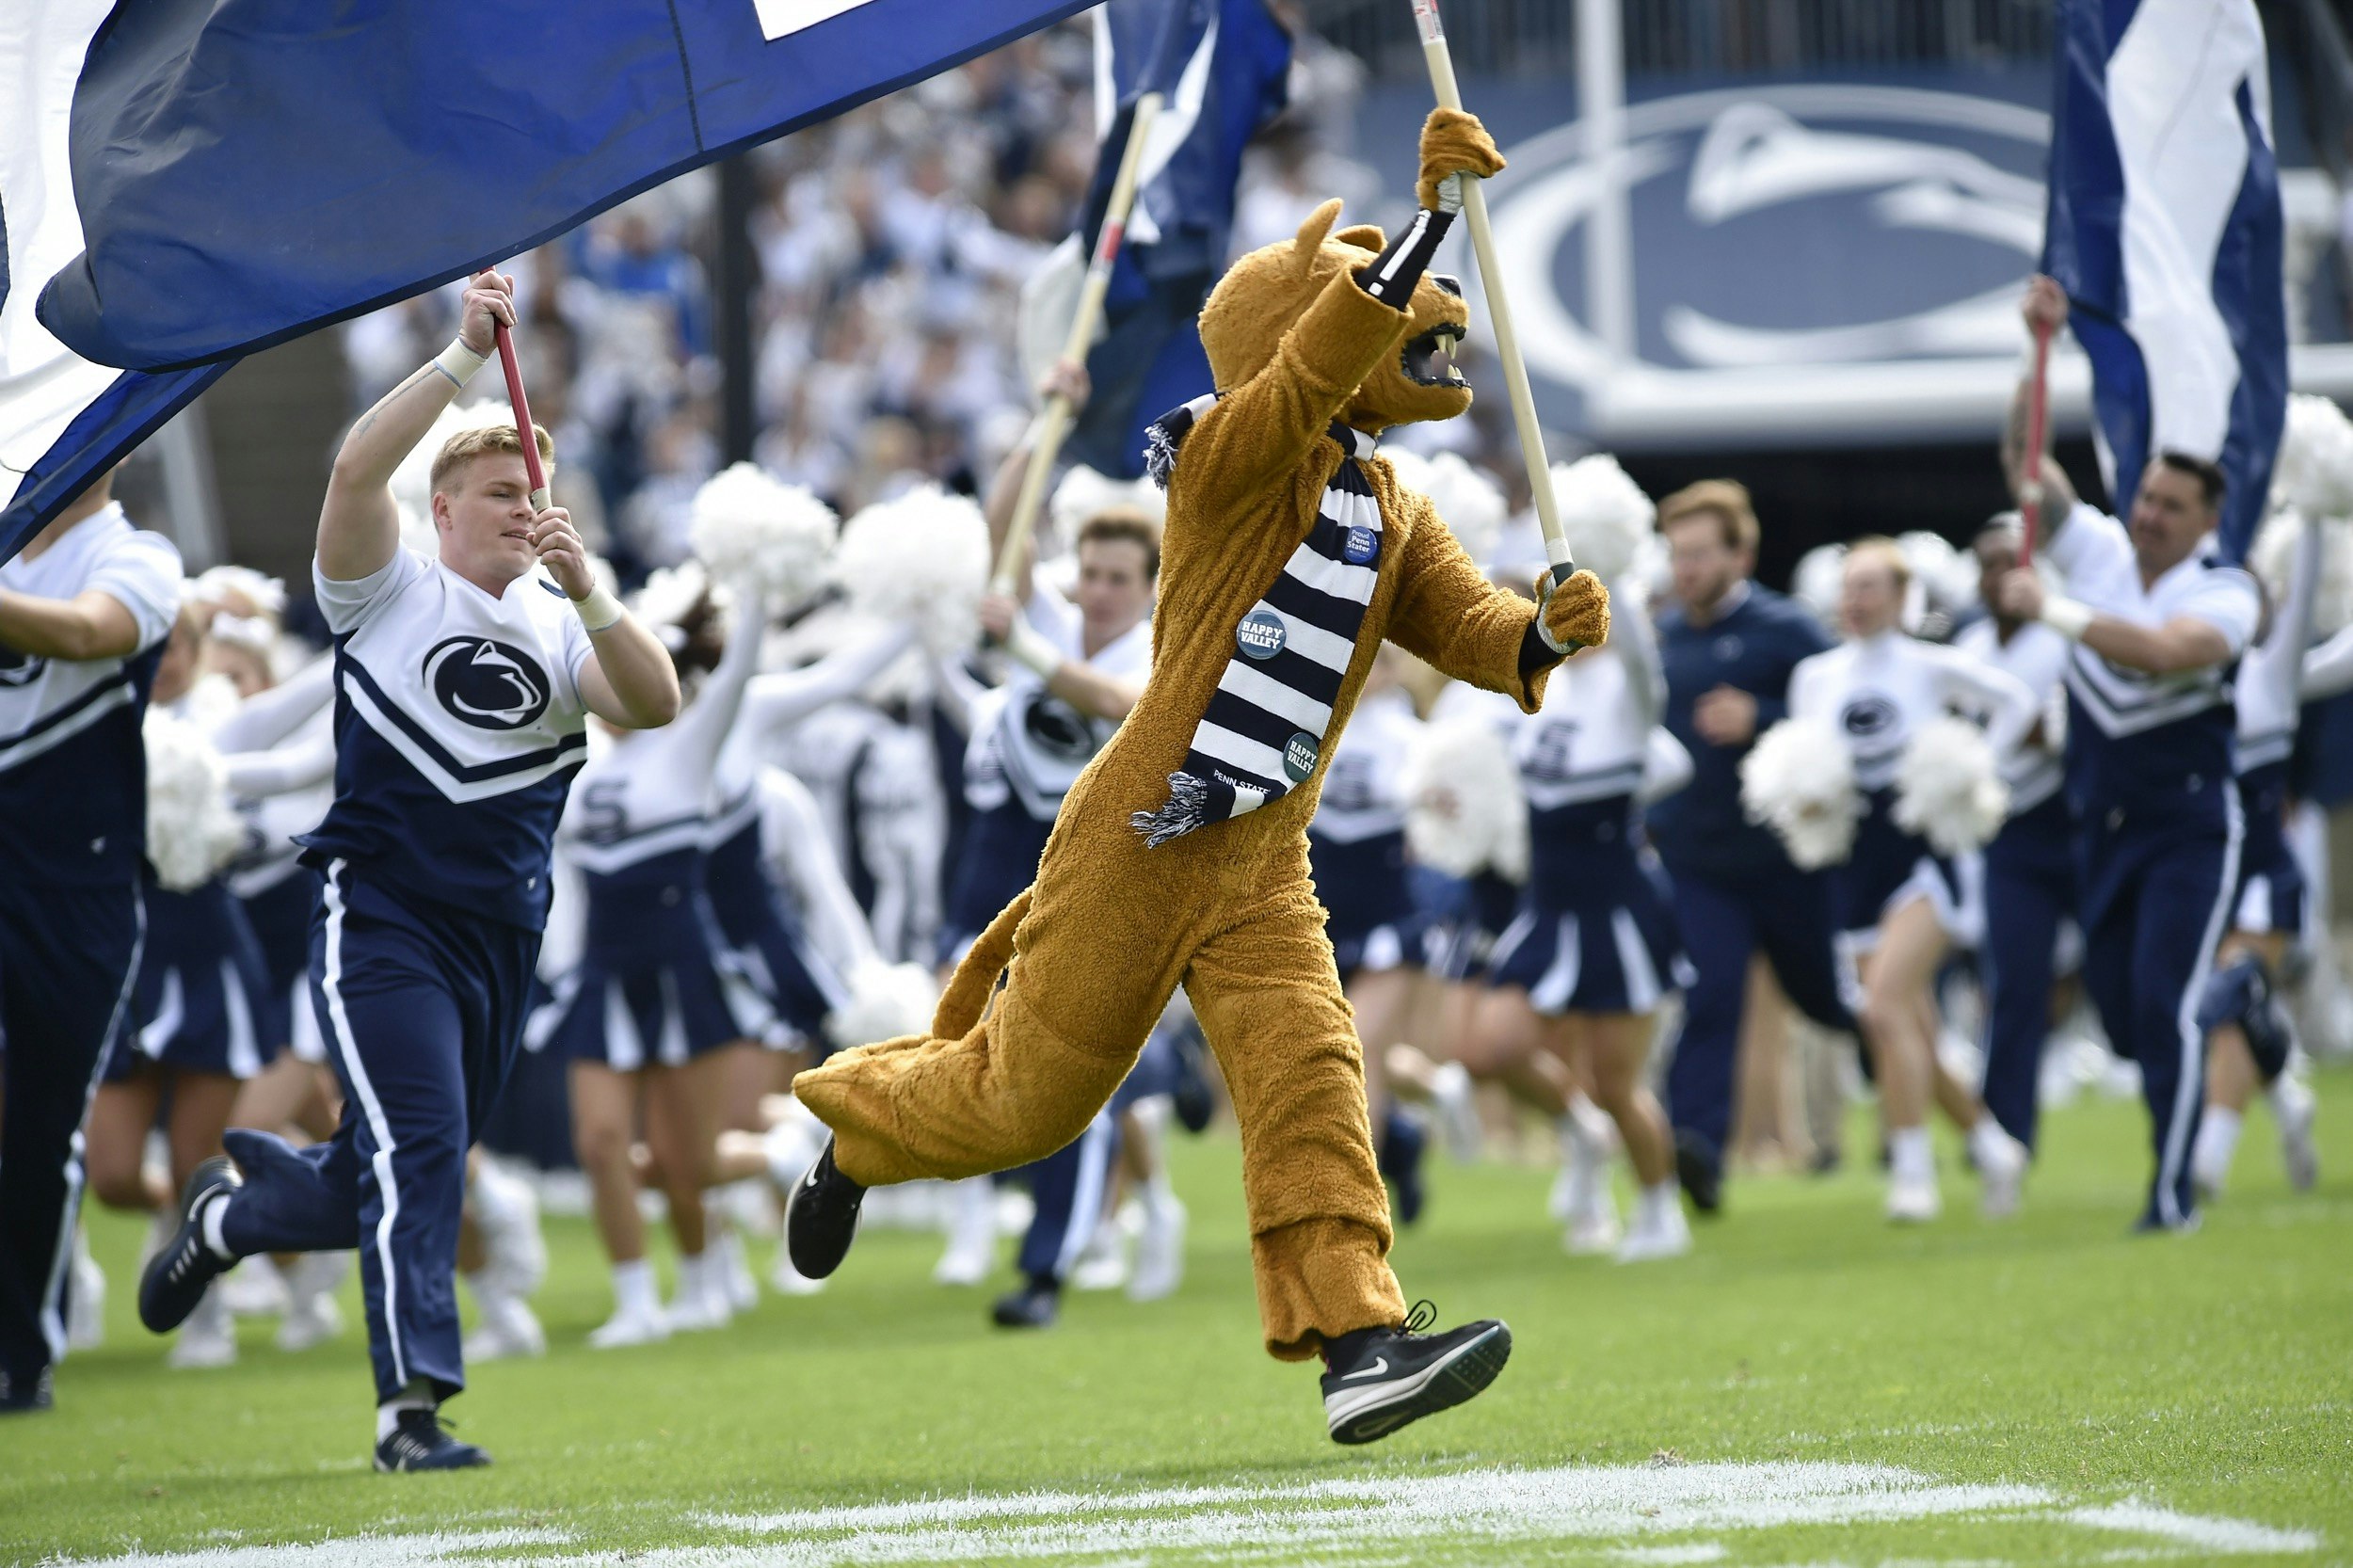 The Nittany Lion Mascot, wearing a blue and white striped scarf, leads the Penn State Cheerleaders onto the field as he or she waves a flag with the school's football logo; Fall in State College Pennsylvania